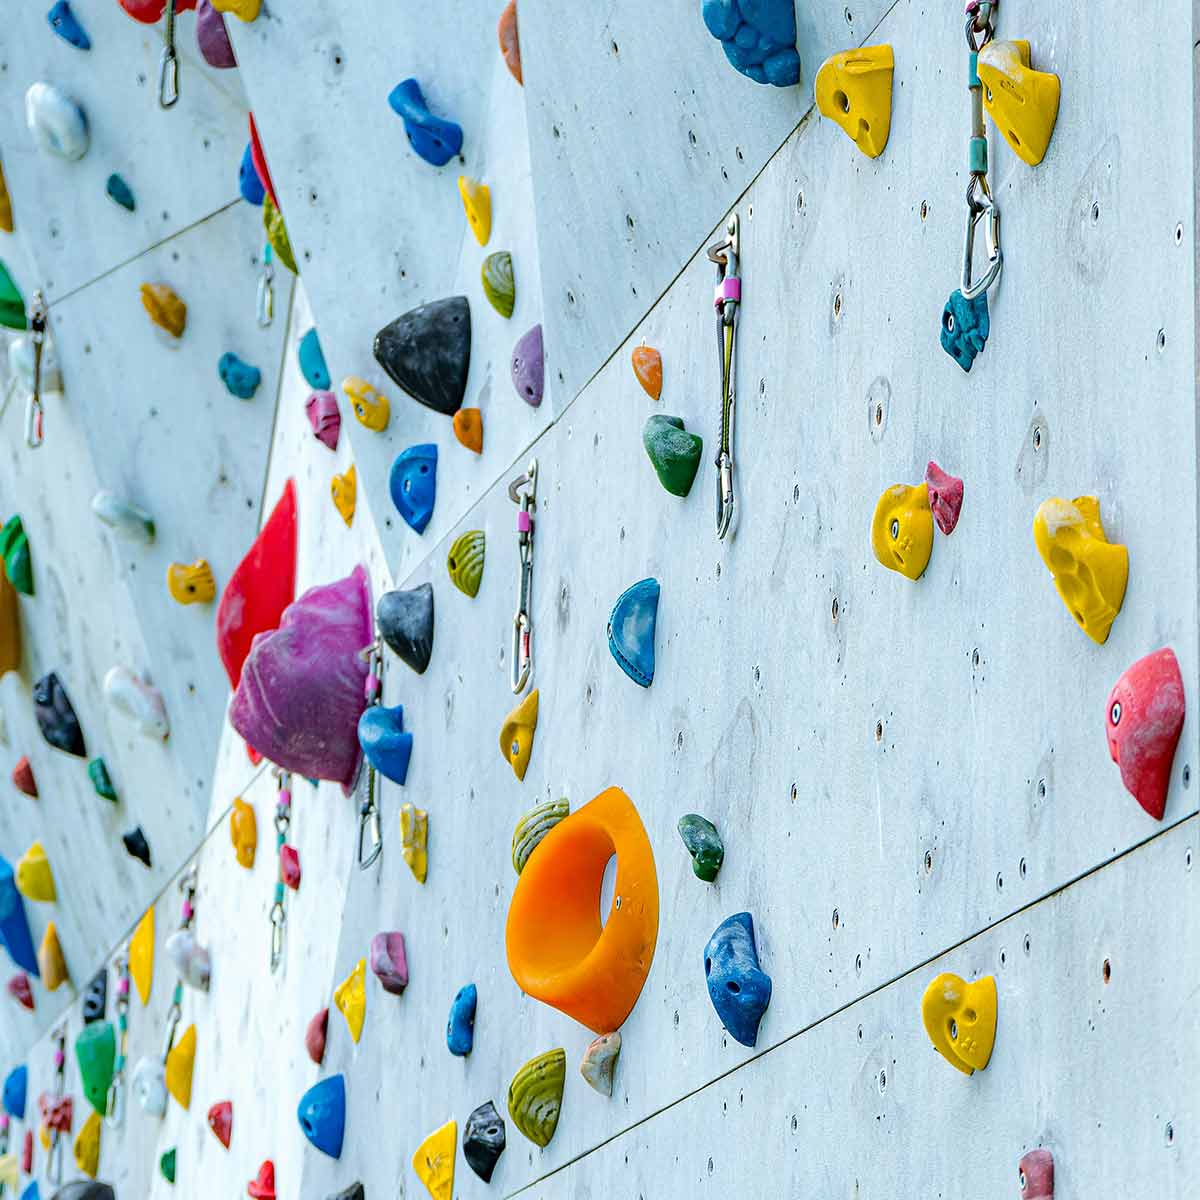 An artificial competition rock climbing wall with carabiner clips and multi-coloured hand holds